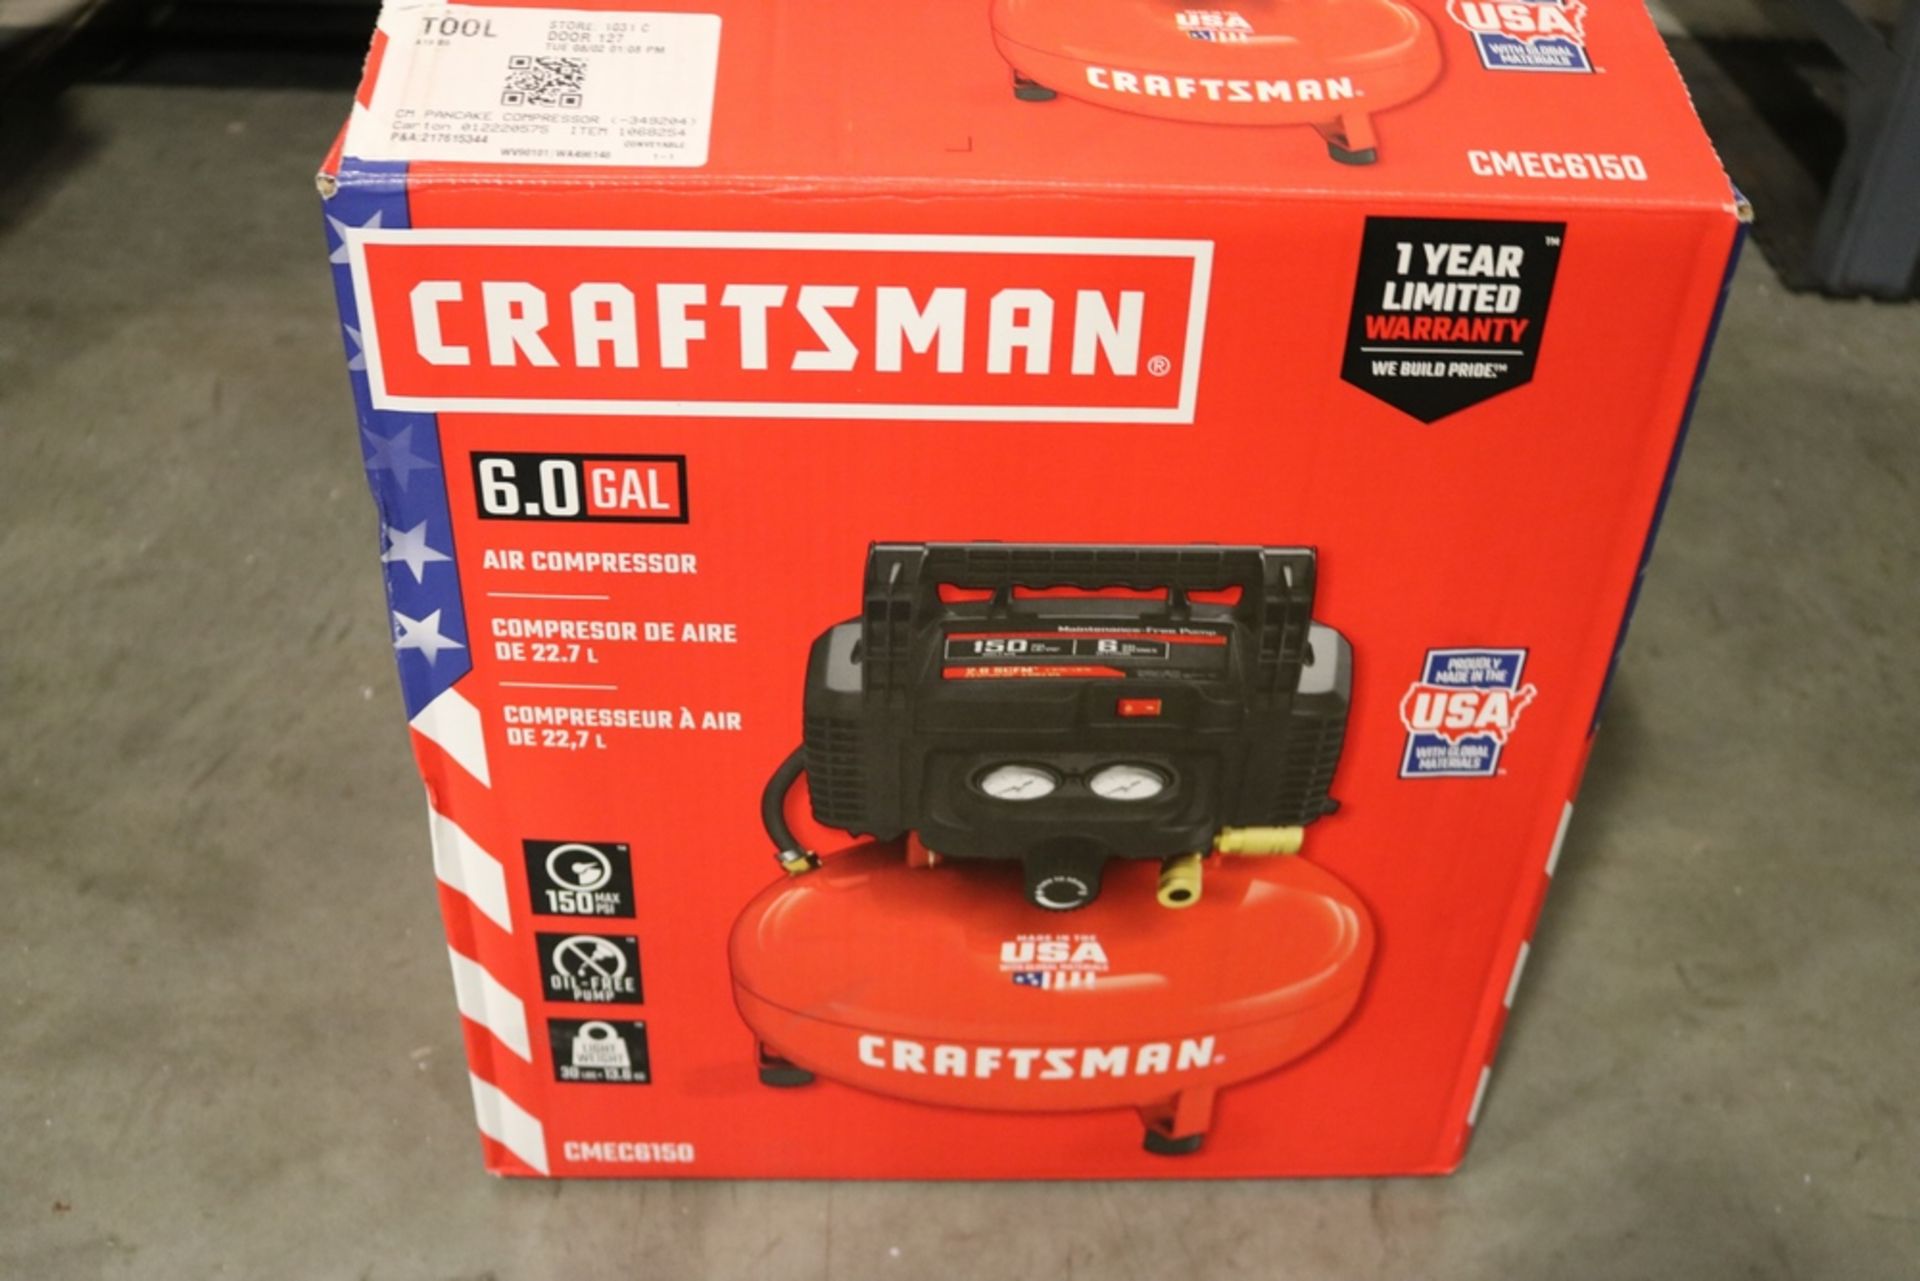 Like New Craftsman 6 Gallon Air Compressor and Coleman Powermate 15 Gallon Portable Air Compressor - Image 2 of 5